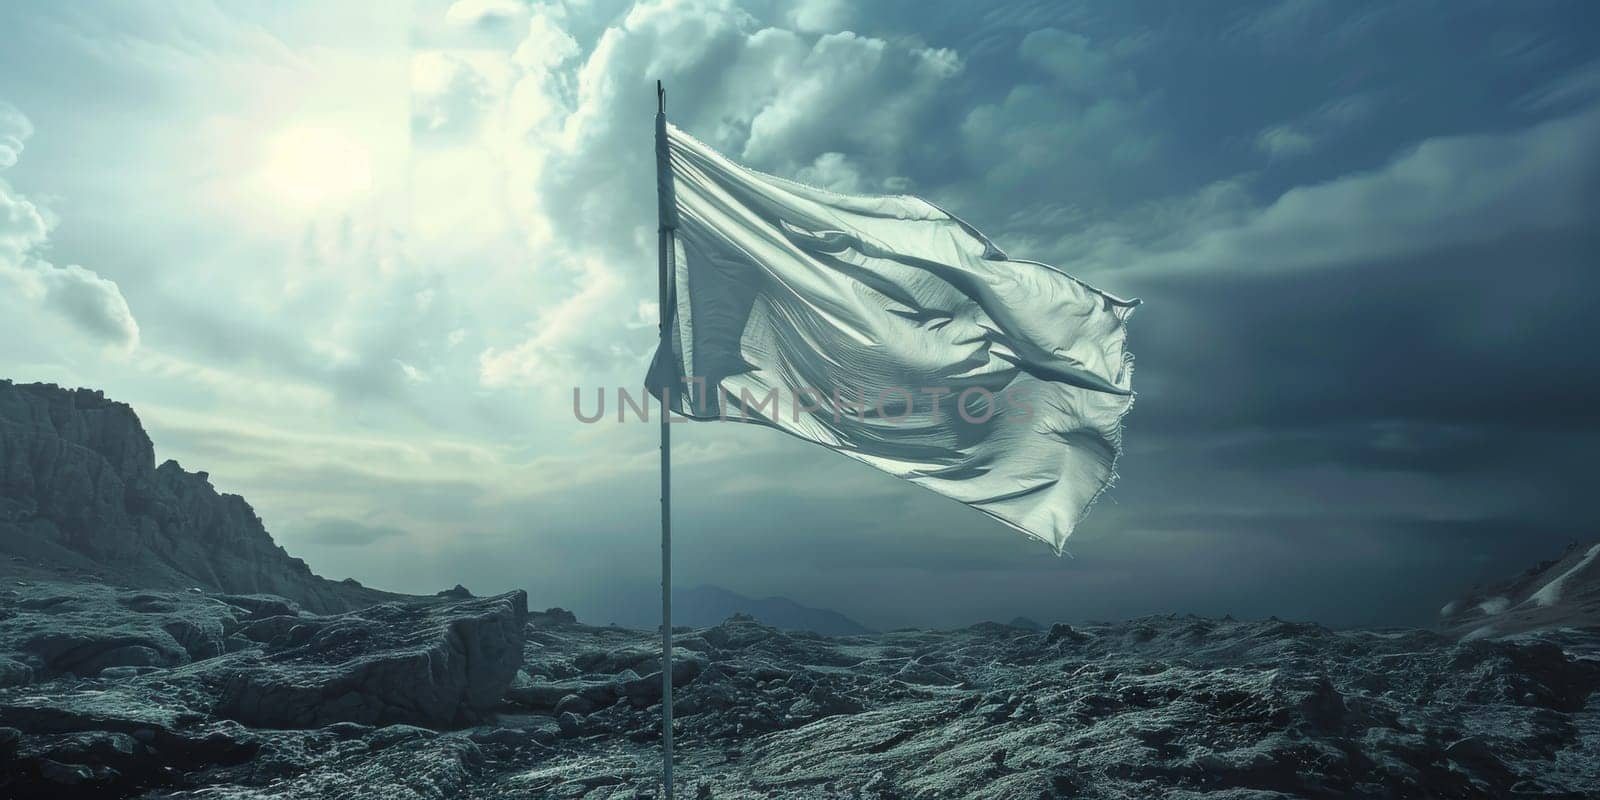 The signaling flag was flying on the conquered territory, surrender and give up concept